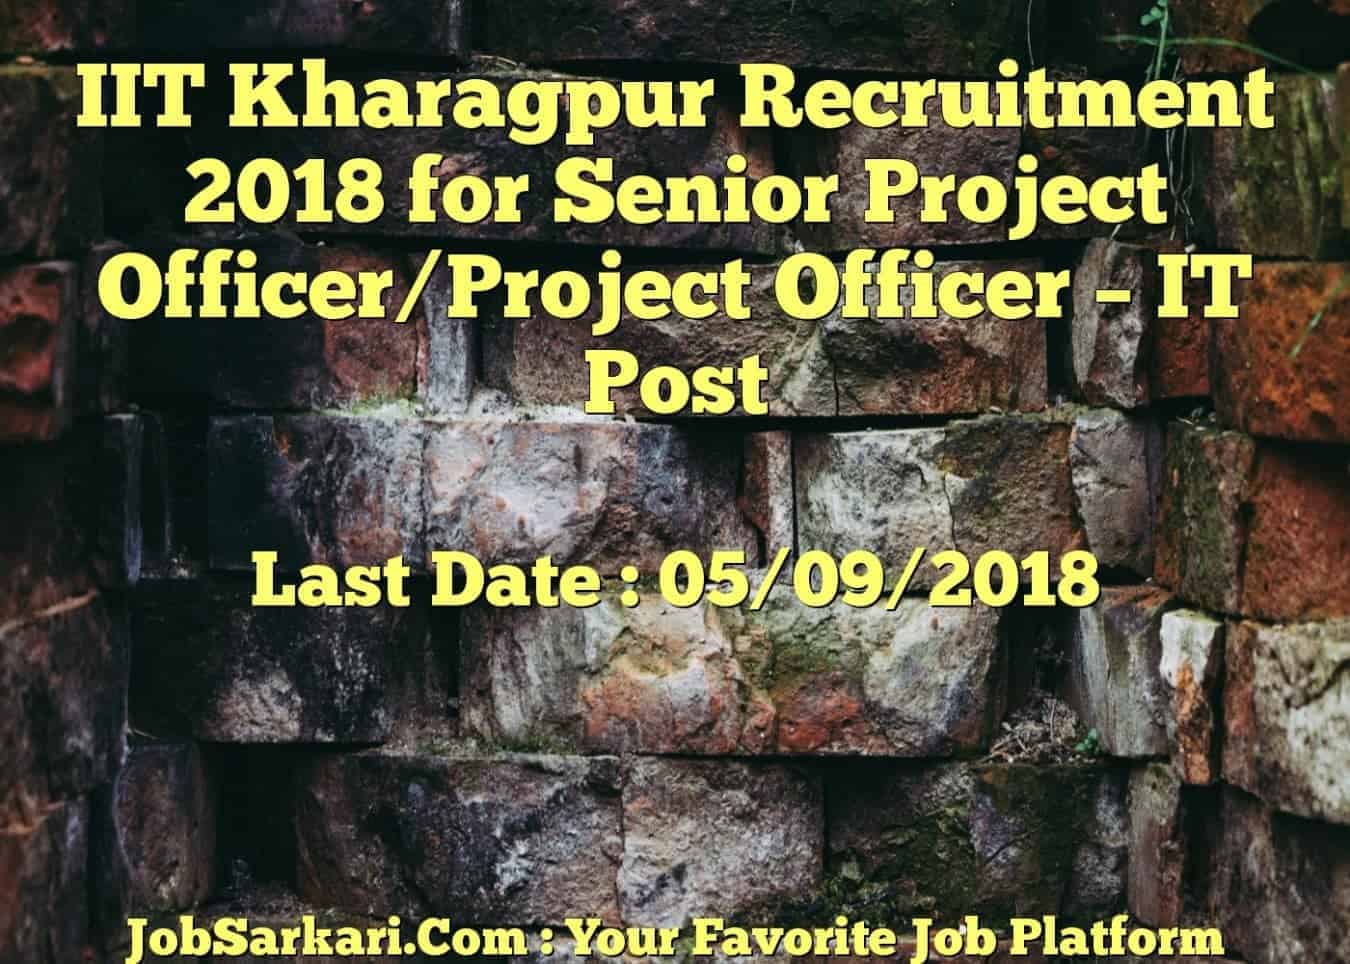 IIT Kharagpur Recruitment 2018 for Senior Project Officer/Project Officer – IT Post